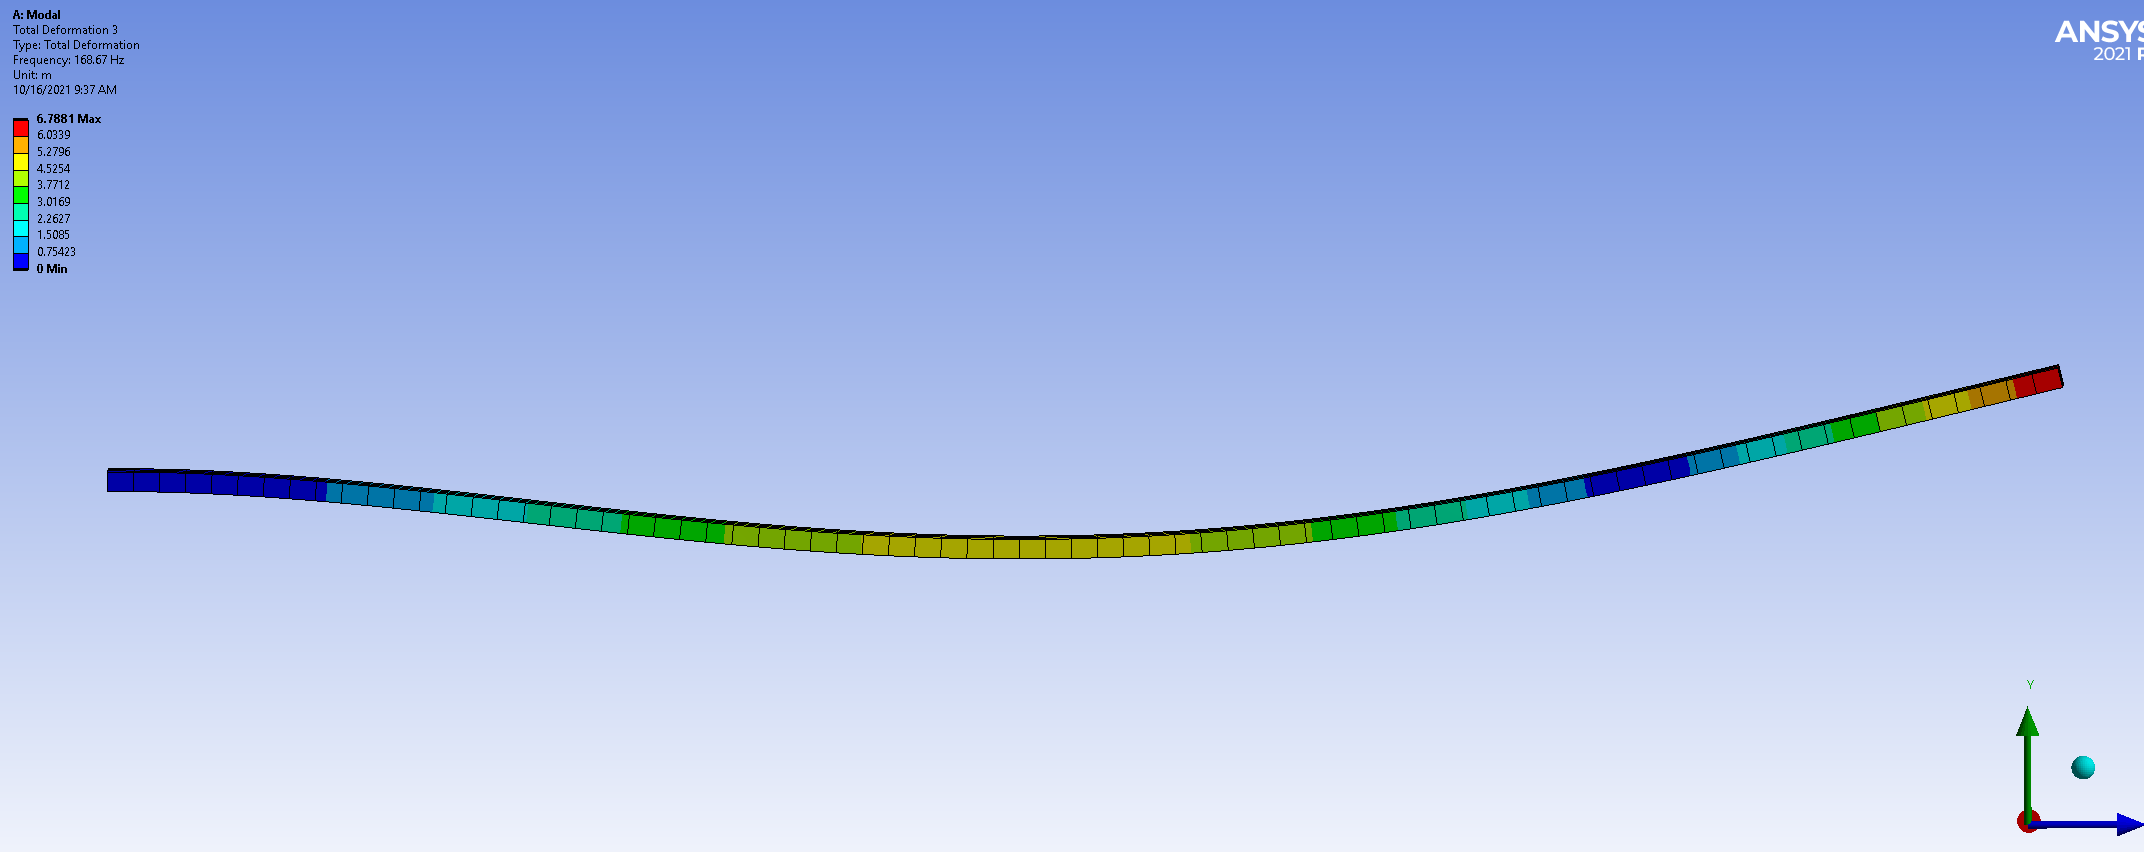 Figure 4: Vibration in the vertical axis.